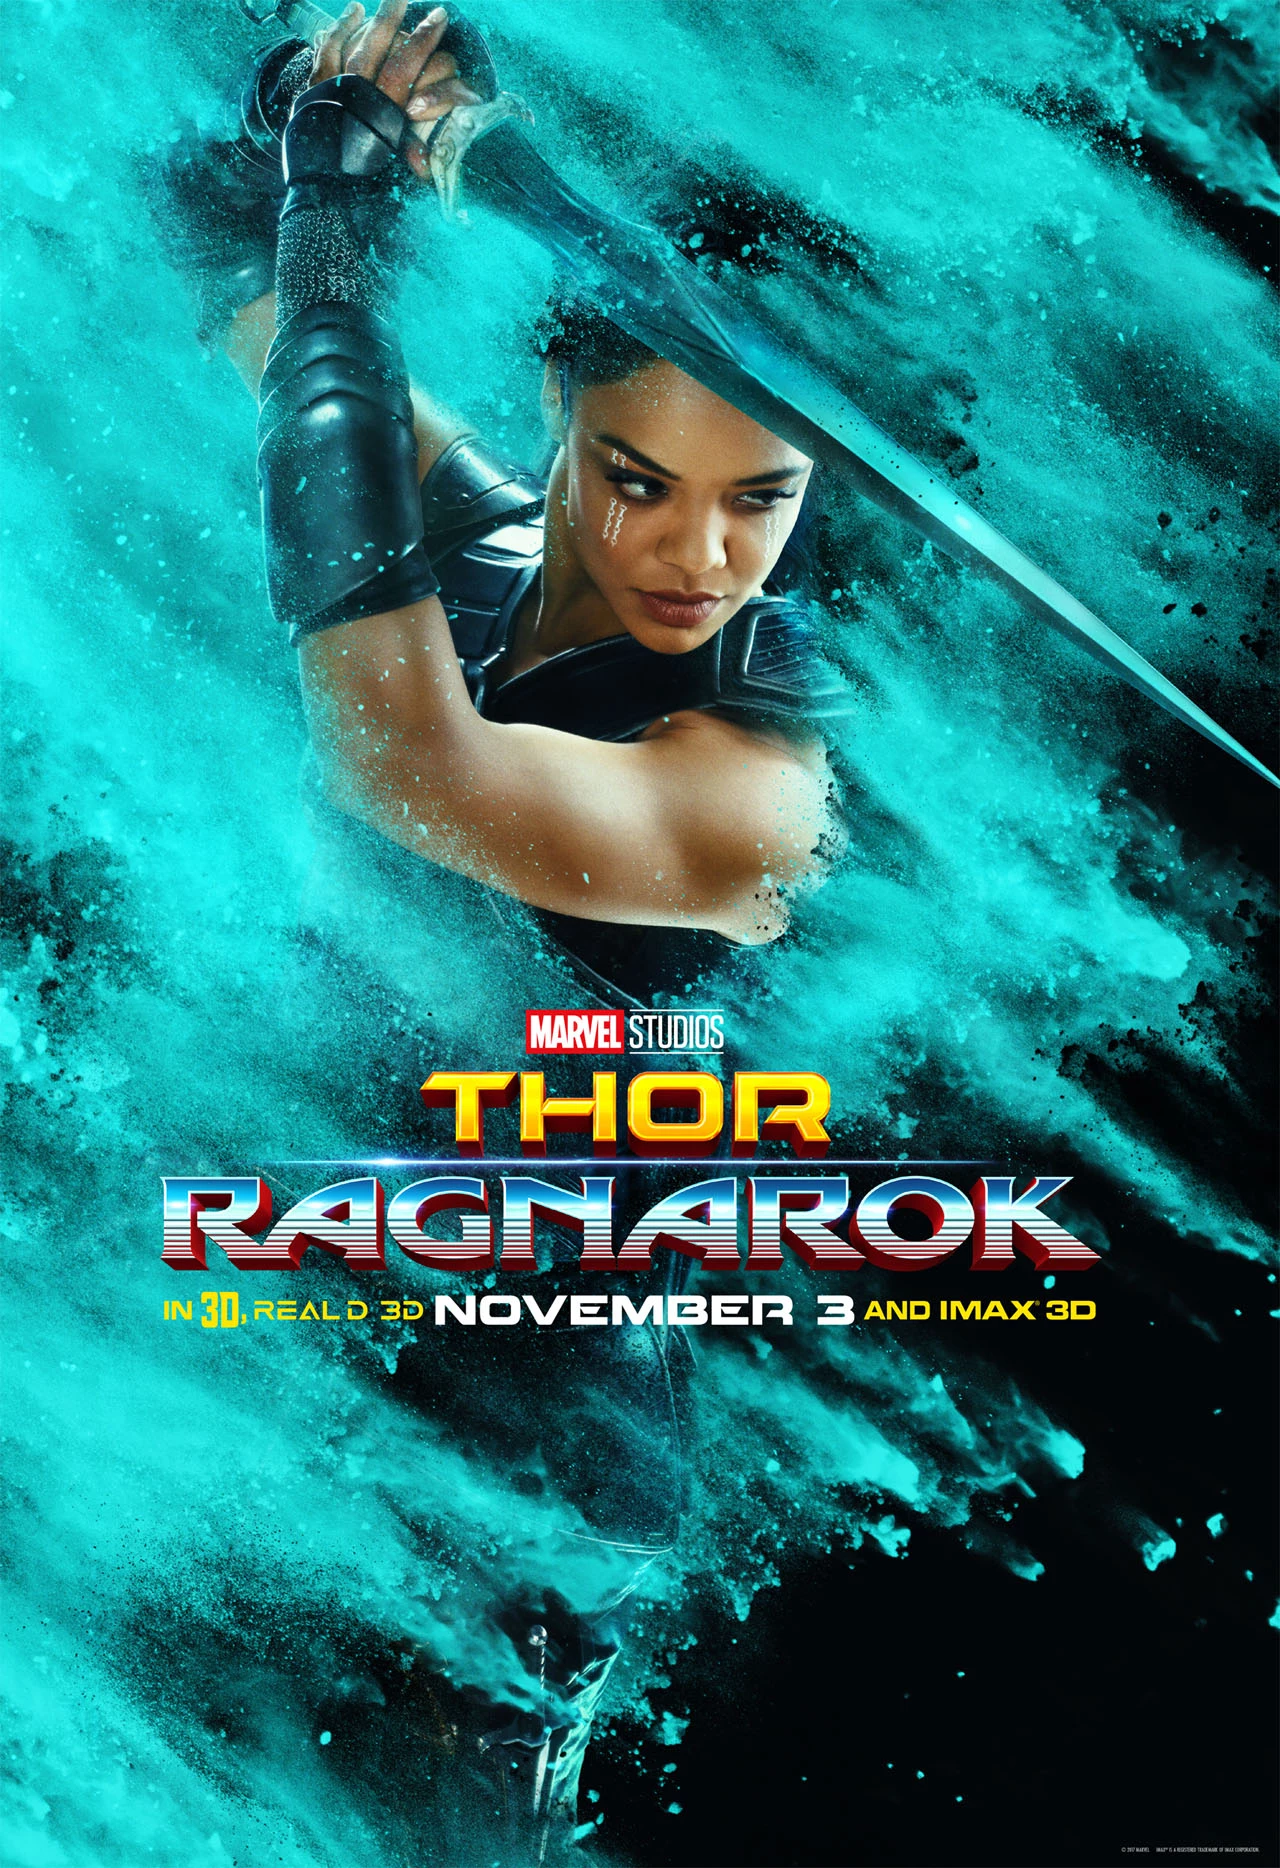 Check Out These Rad 'Thor: Ragnarok' Character Posters